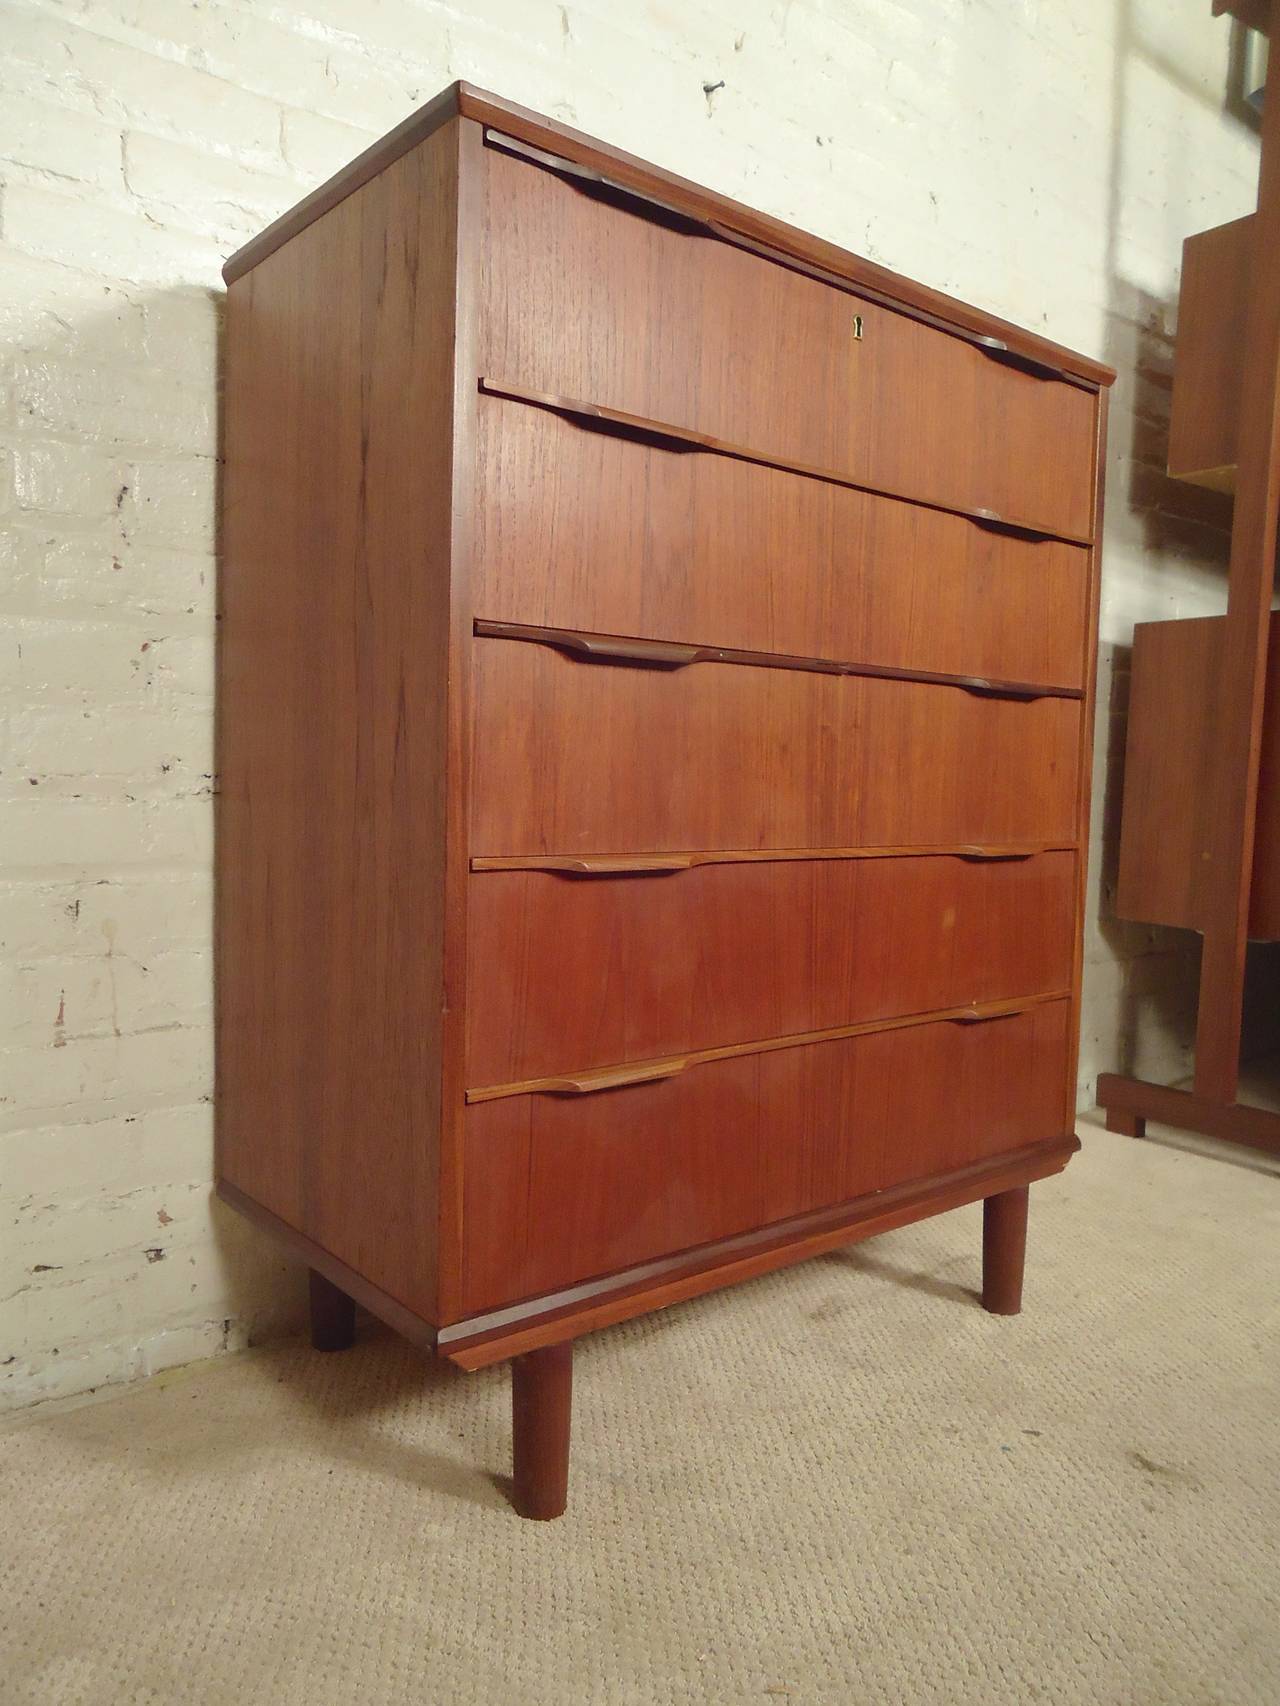 Mid-century modern teak highboy with five sculpted drawers. Simple modern elegance with locking function. 

(Please confirm item location - NY or NJ - with dealer)